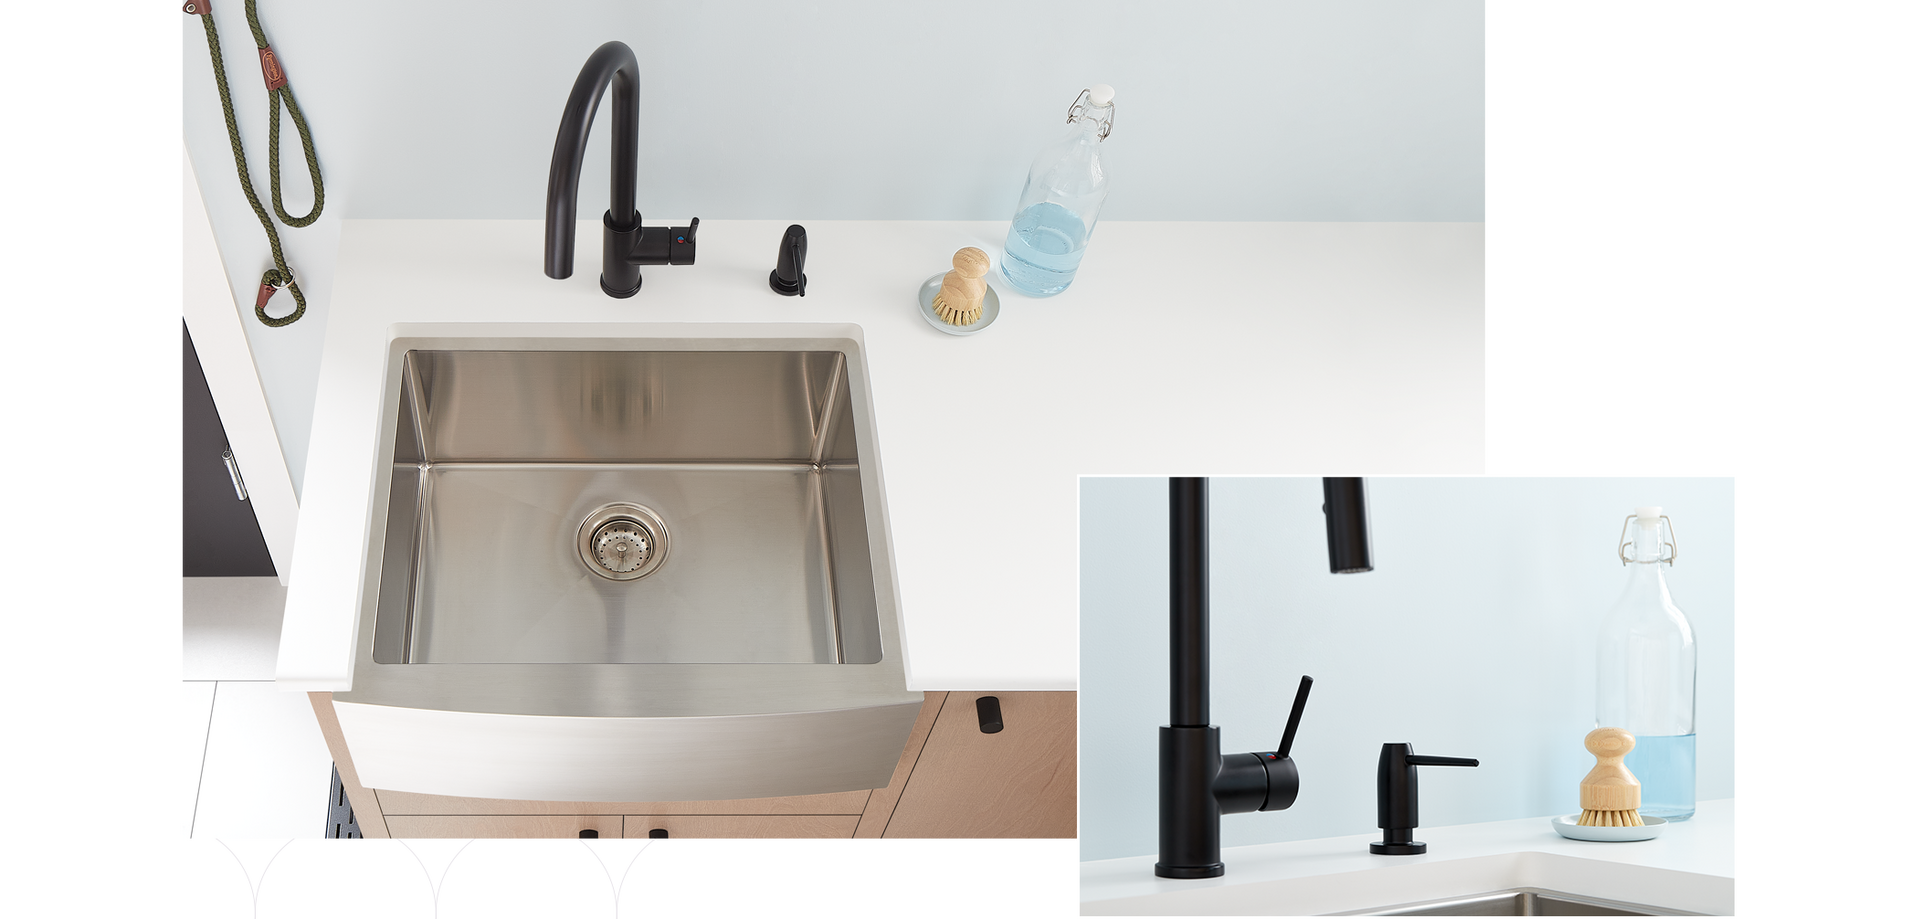 Ravenel Pull-Down Kitchen Faucet, Contemporary Soap or Lotion Dispenser Matte Black, 24" Fournier Stainless Steel Farmhouse Sink